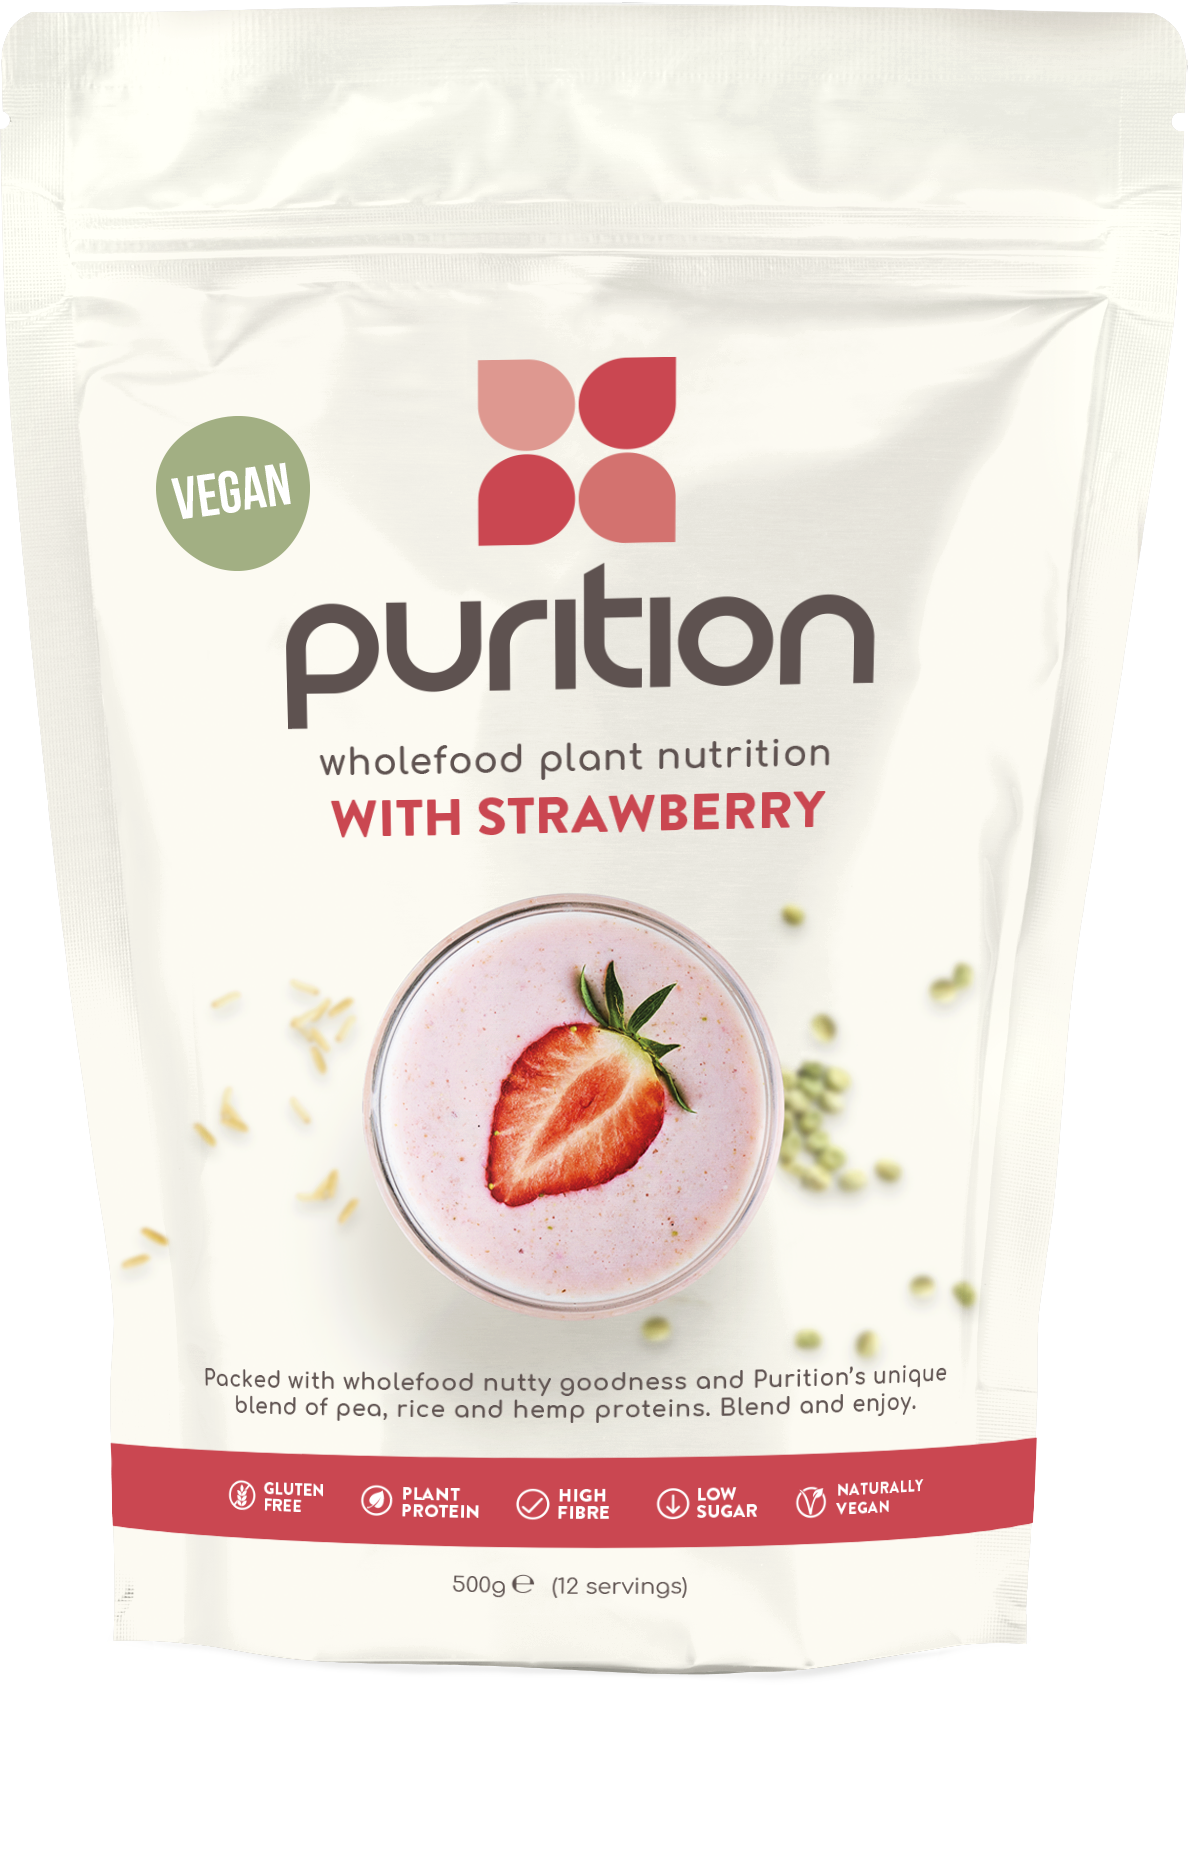 VEGAN Wholefood Plant Nutrition With Strawberry 500g